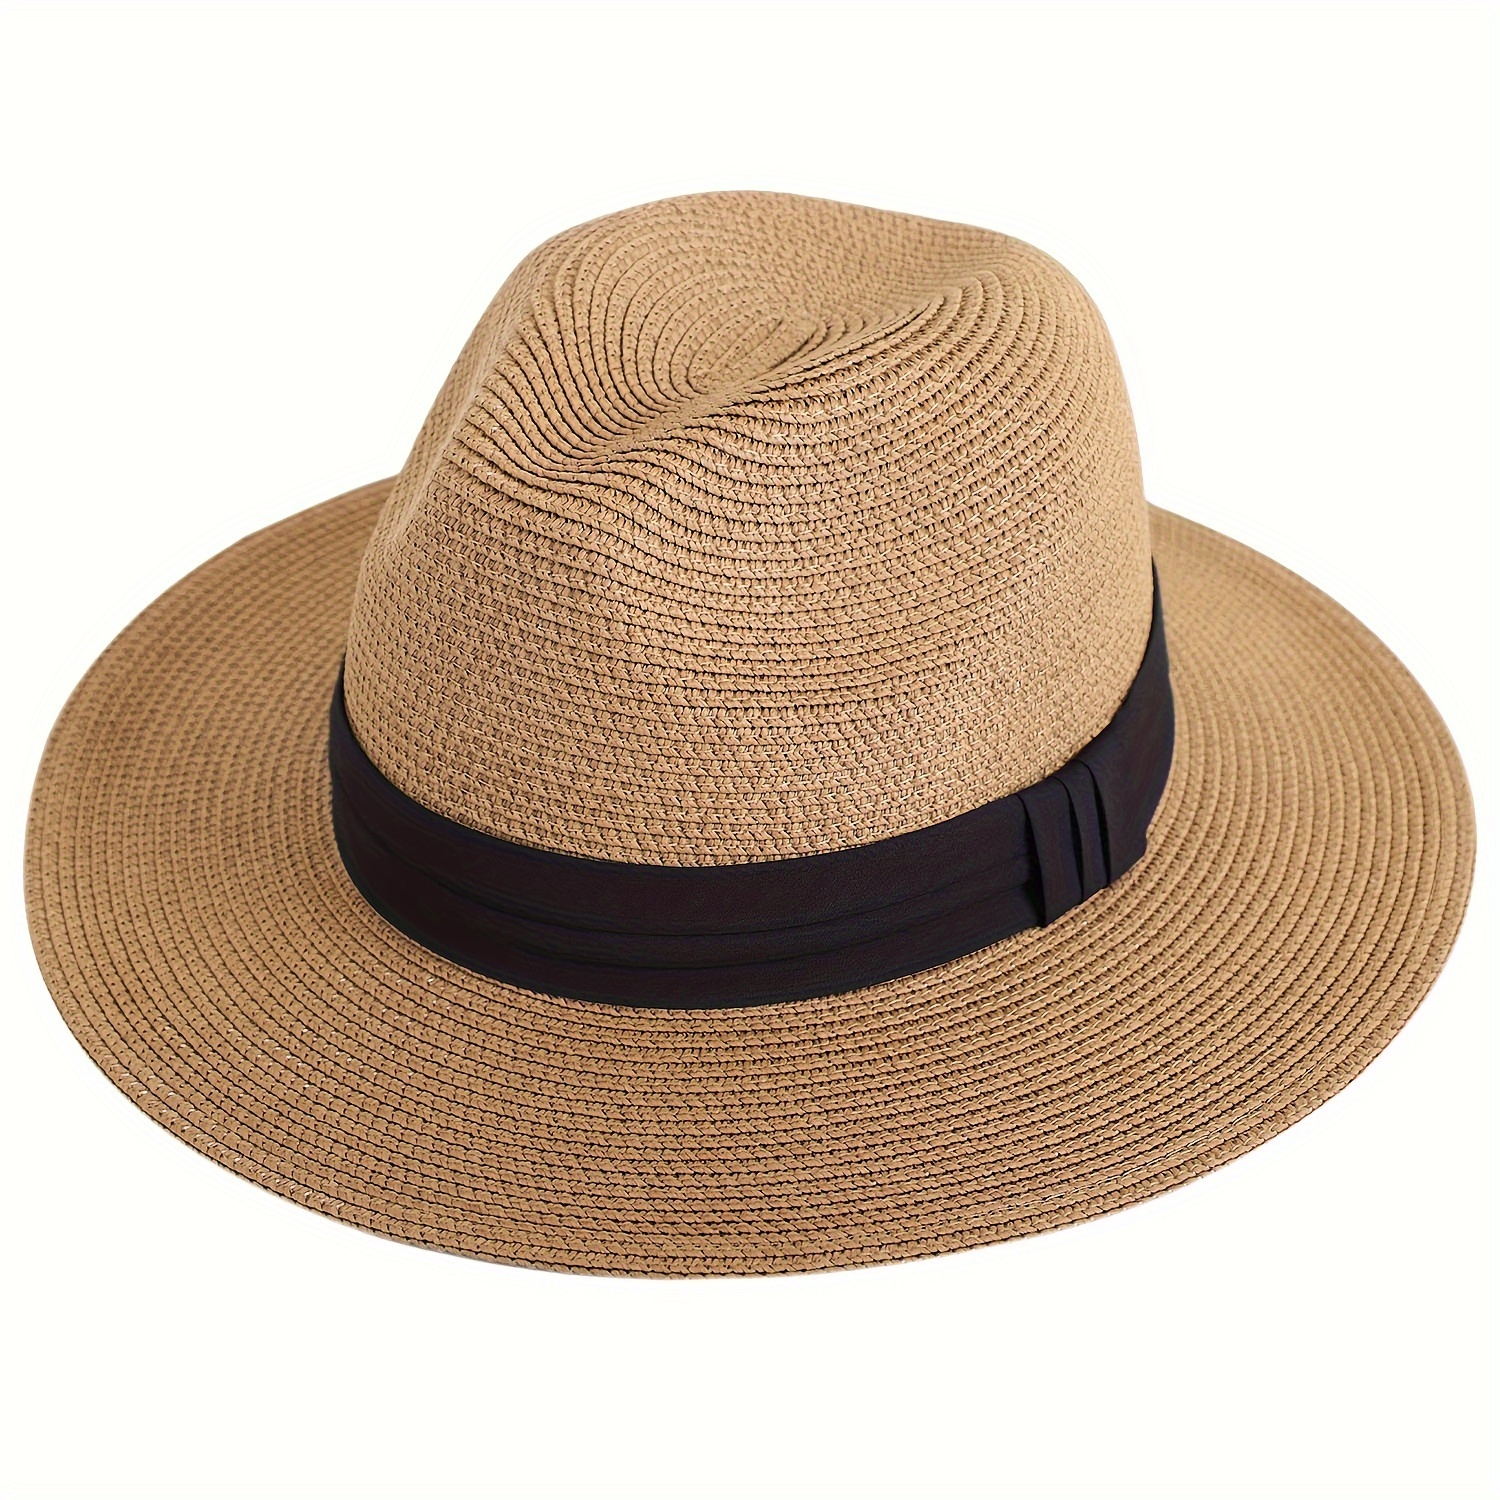 

Wide Brim Straw Panama Hat - Stylish Lightweight, Breathable Men's & Women's Fedoras Provide Excellent Uv Protection - Perfect Beach, Pool, Festival, Vacation, & Resort Wear